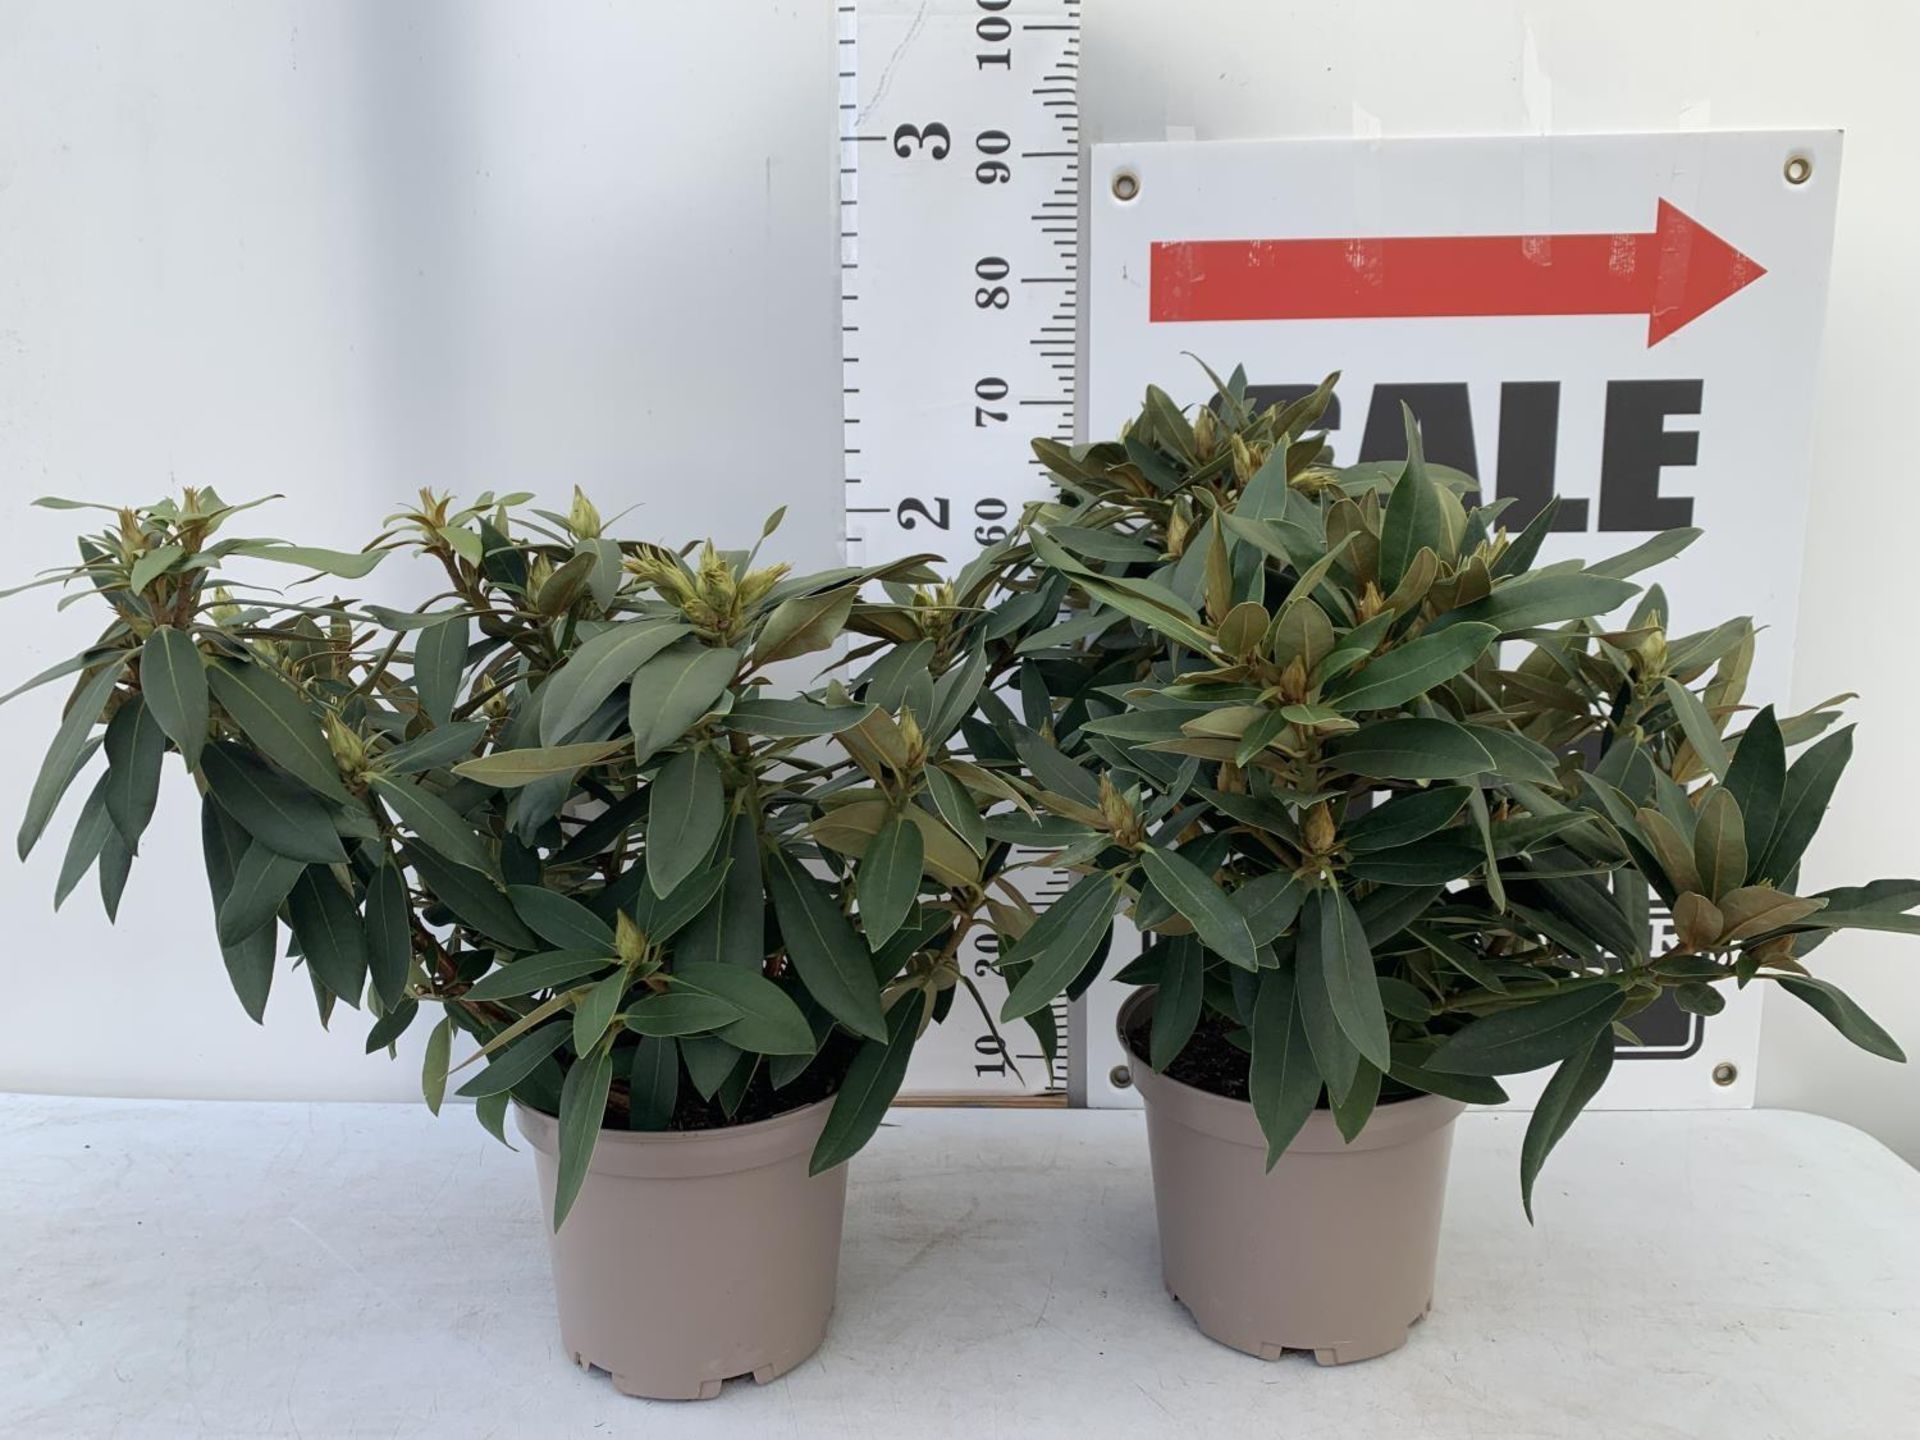 TWO RHODODENDRONS TARAGONA RED IN 7.5 LTR POTS APPROX 70CM IN HEIGHT PLUS VAT TO BE SOLD FOR THE TWO - Image 2 of 8